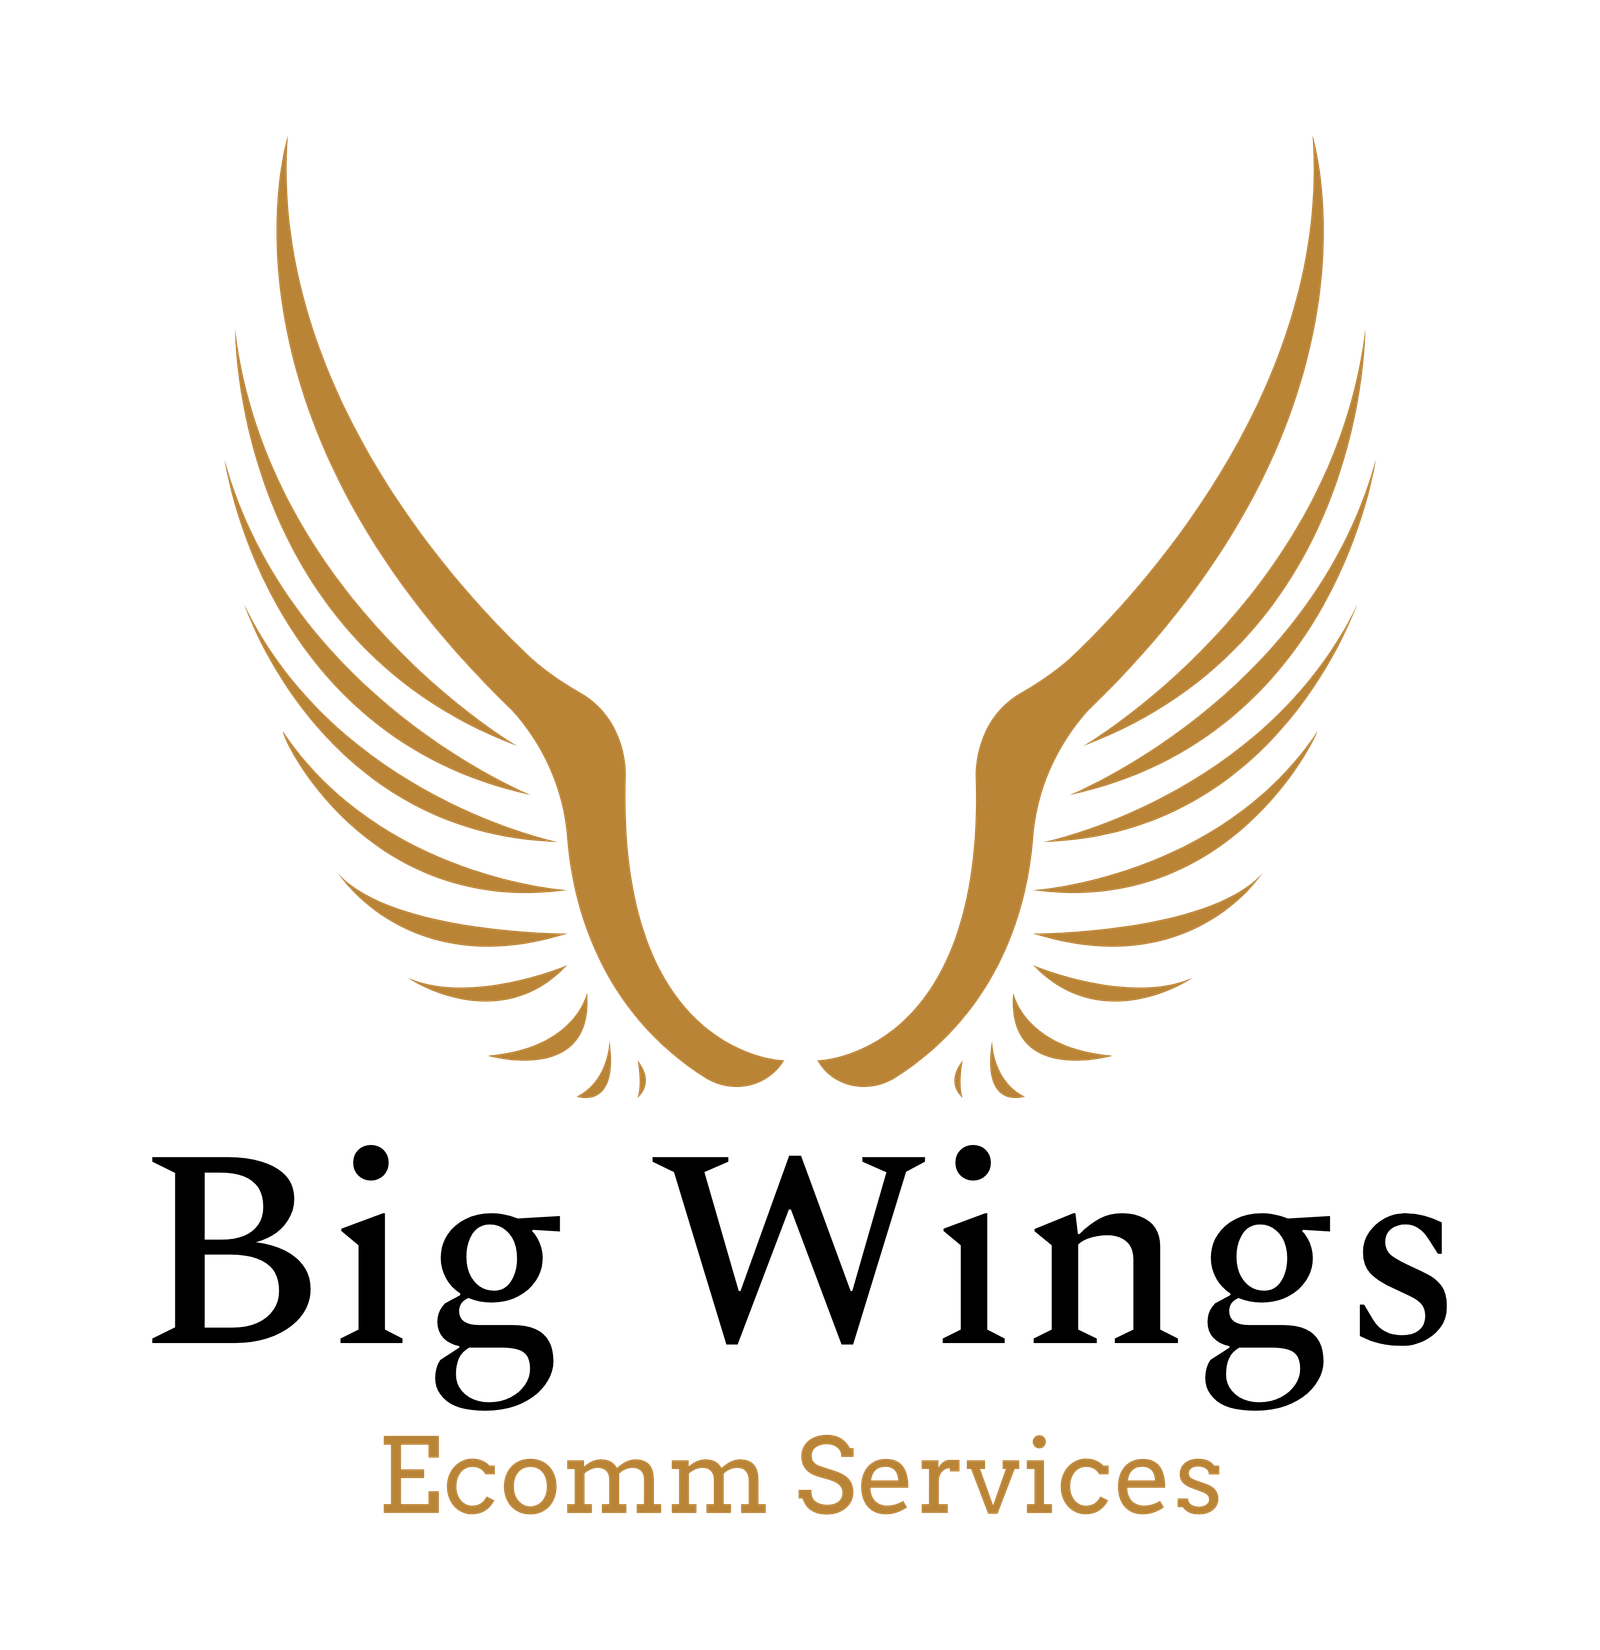 BIG WINGS ECOMM SERVICES